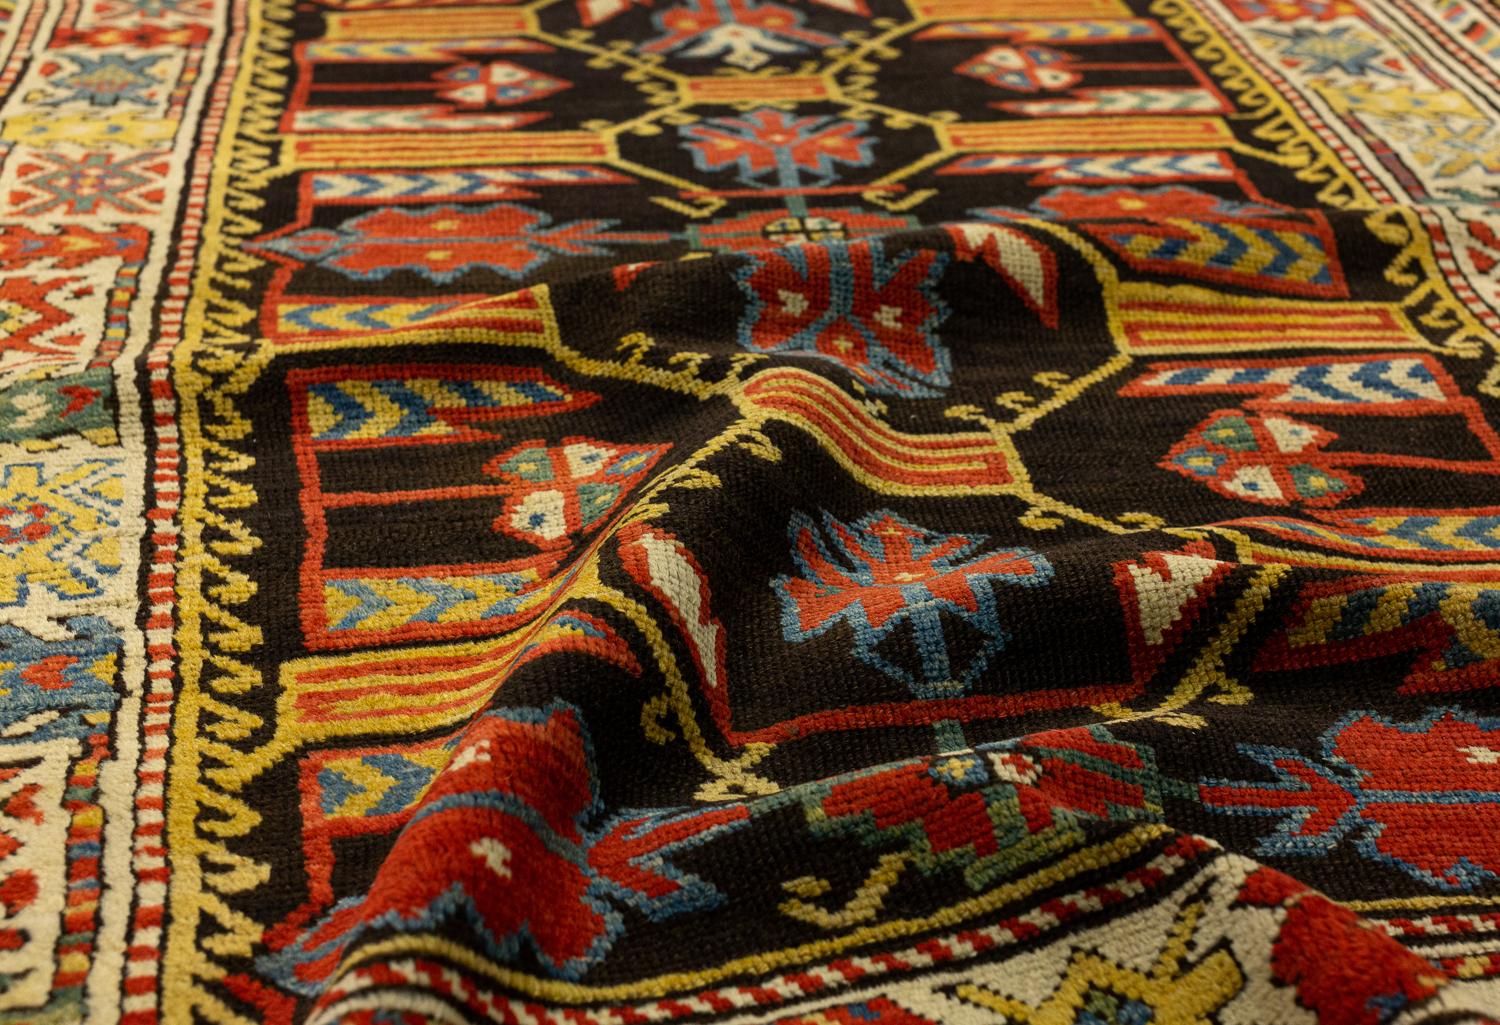 This is an antique Kuba rug woven in the northern part of the Caucasus mountains and was woven during the end of the 19th century. It has a unique all-over highly geometric design that has saturated colors on a black background creating a dramatic